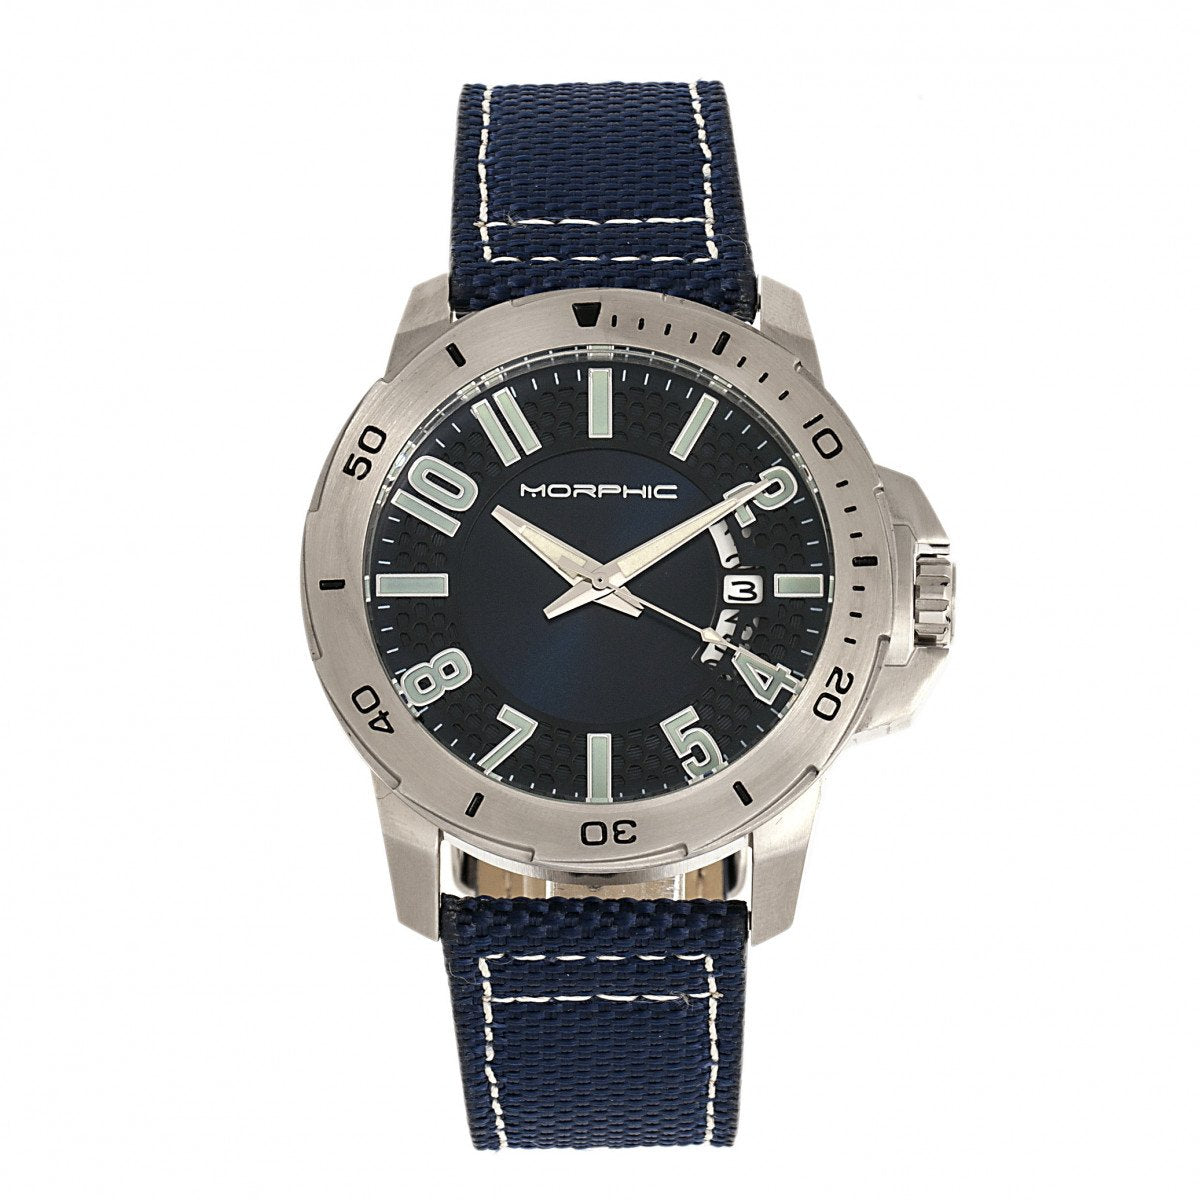 Morphic M70 Series Canvas-Overlaid Leather-Band Watch w/Date - Silver/Blue - MPH7002